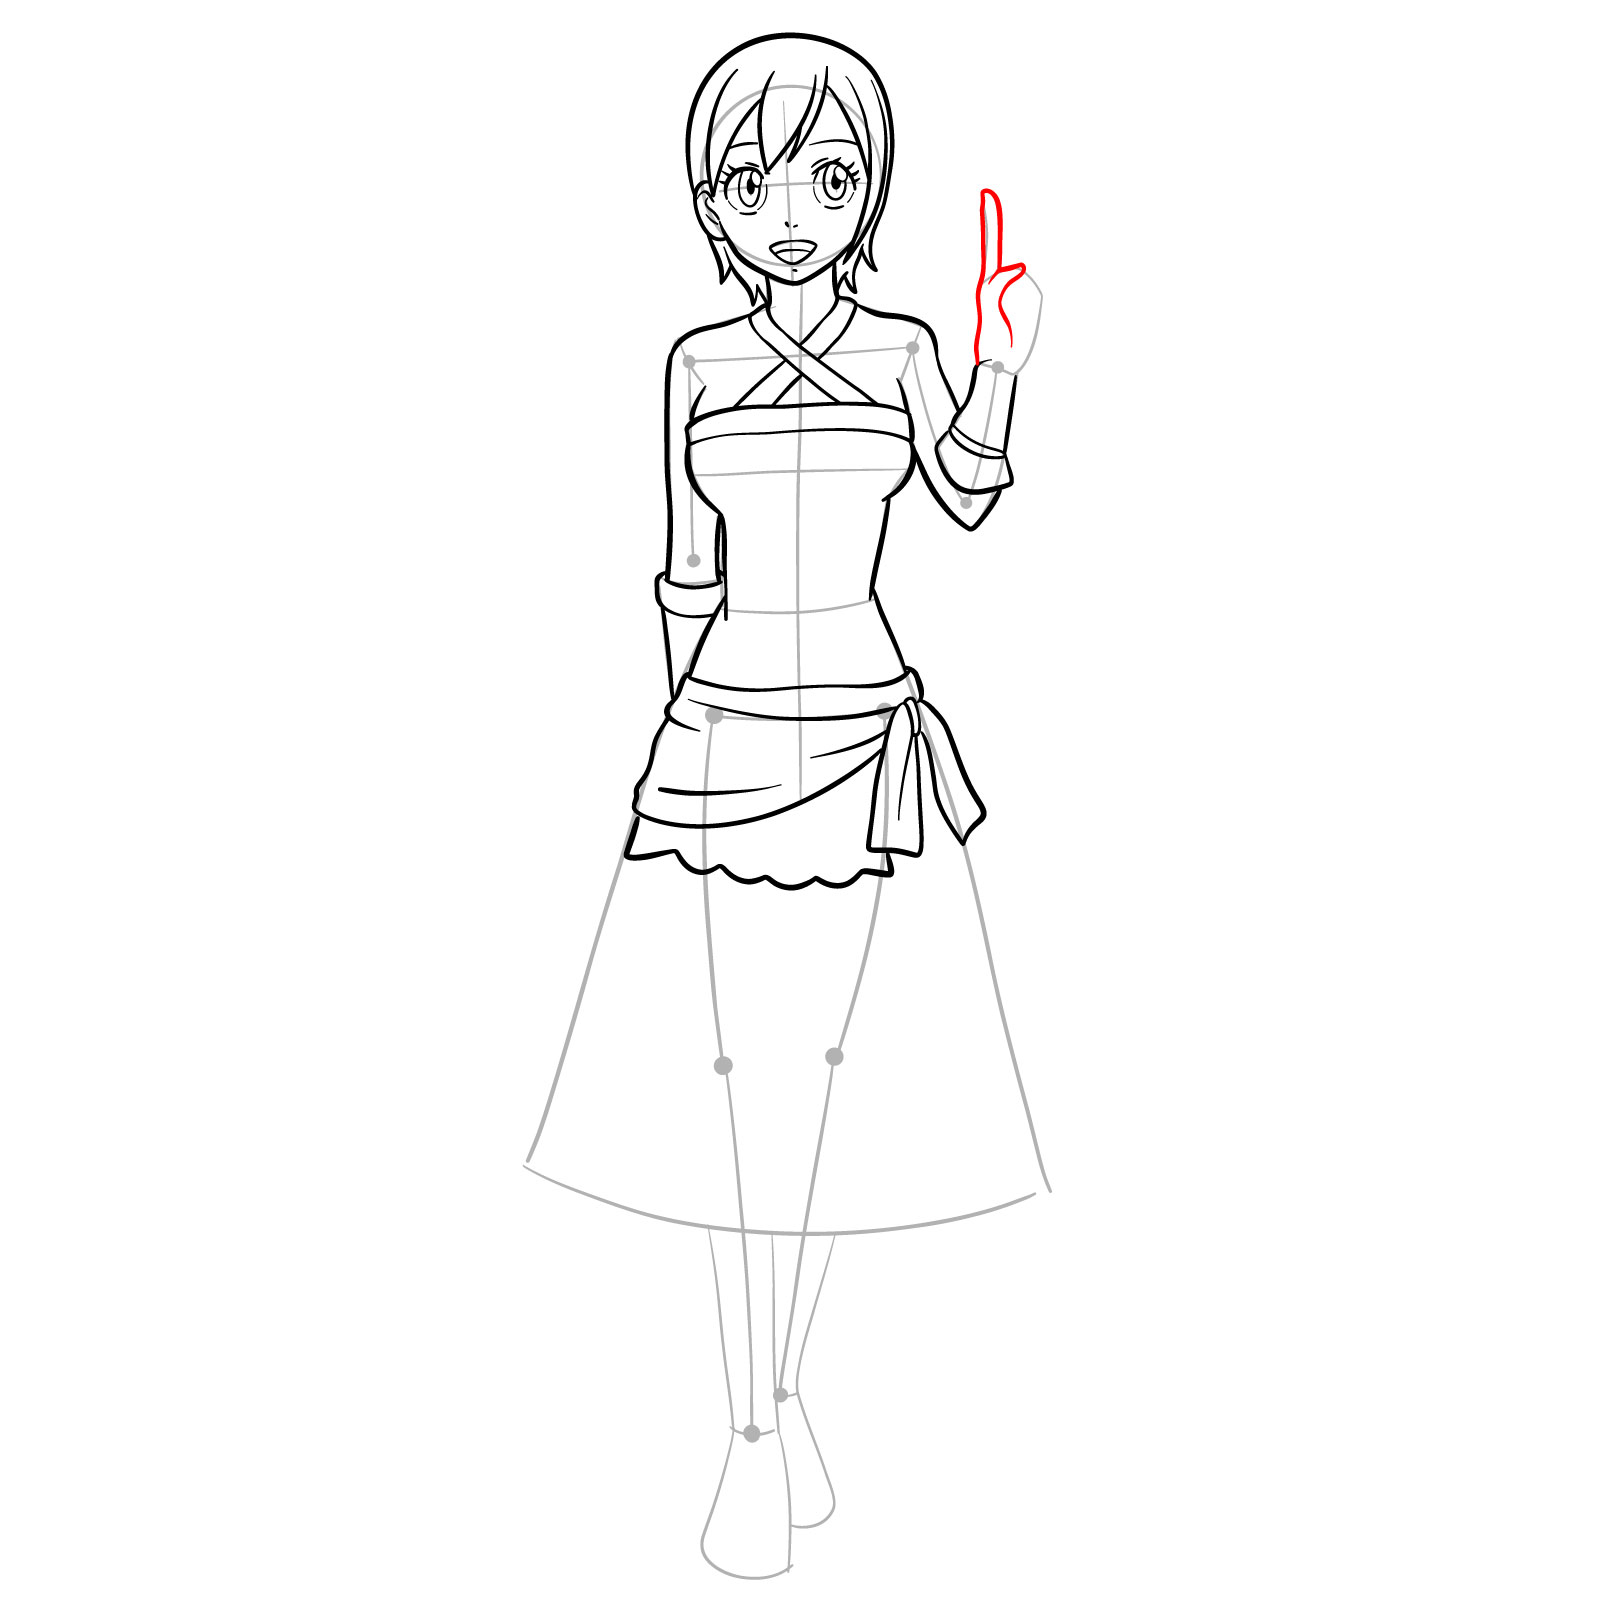 How to draw Lisanna Strauss from Fairy Tail - step 25